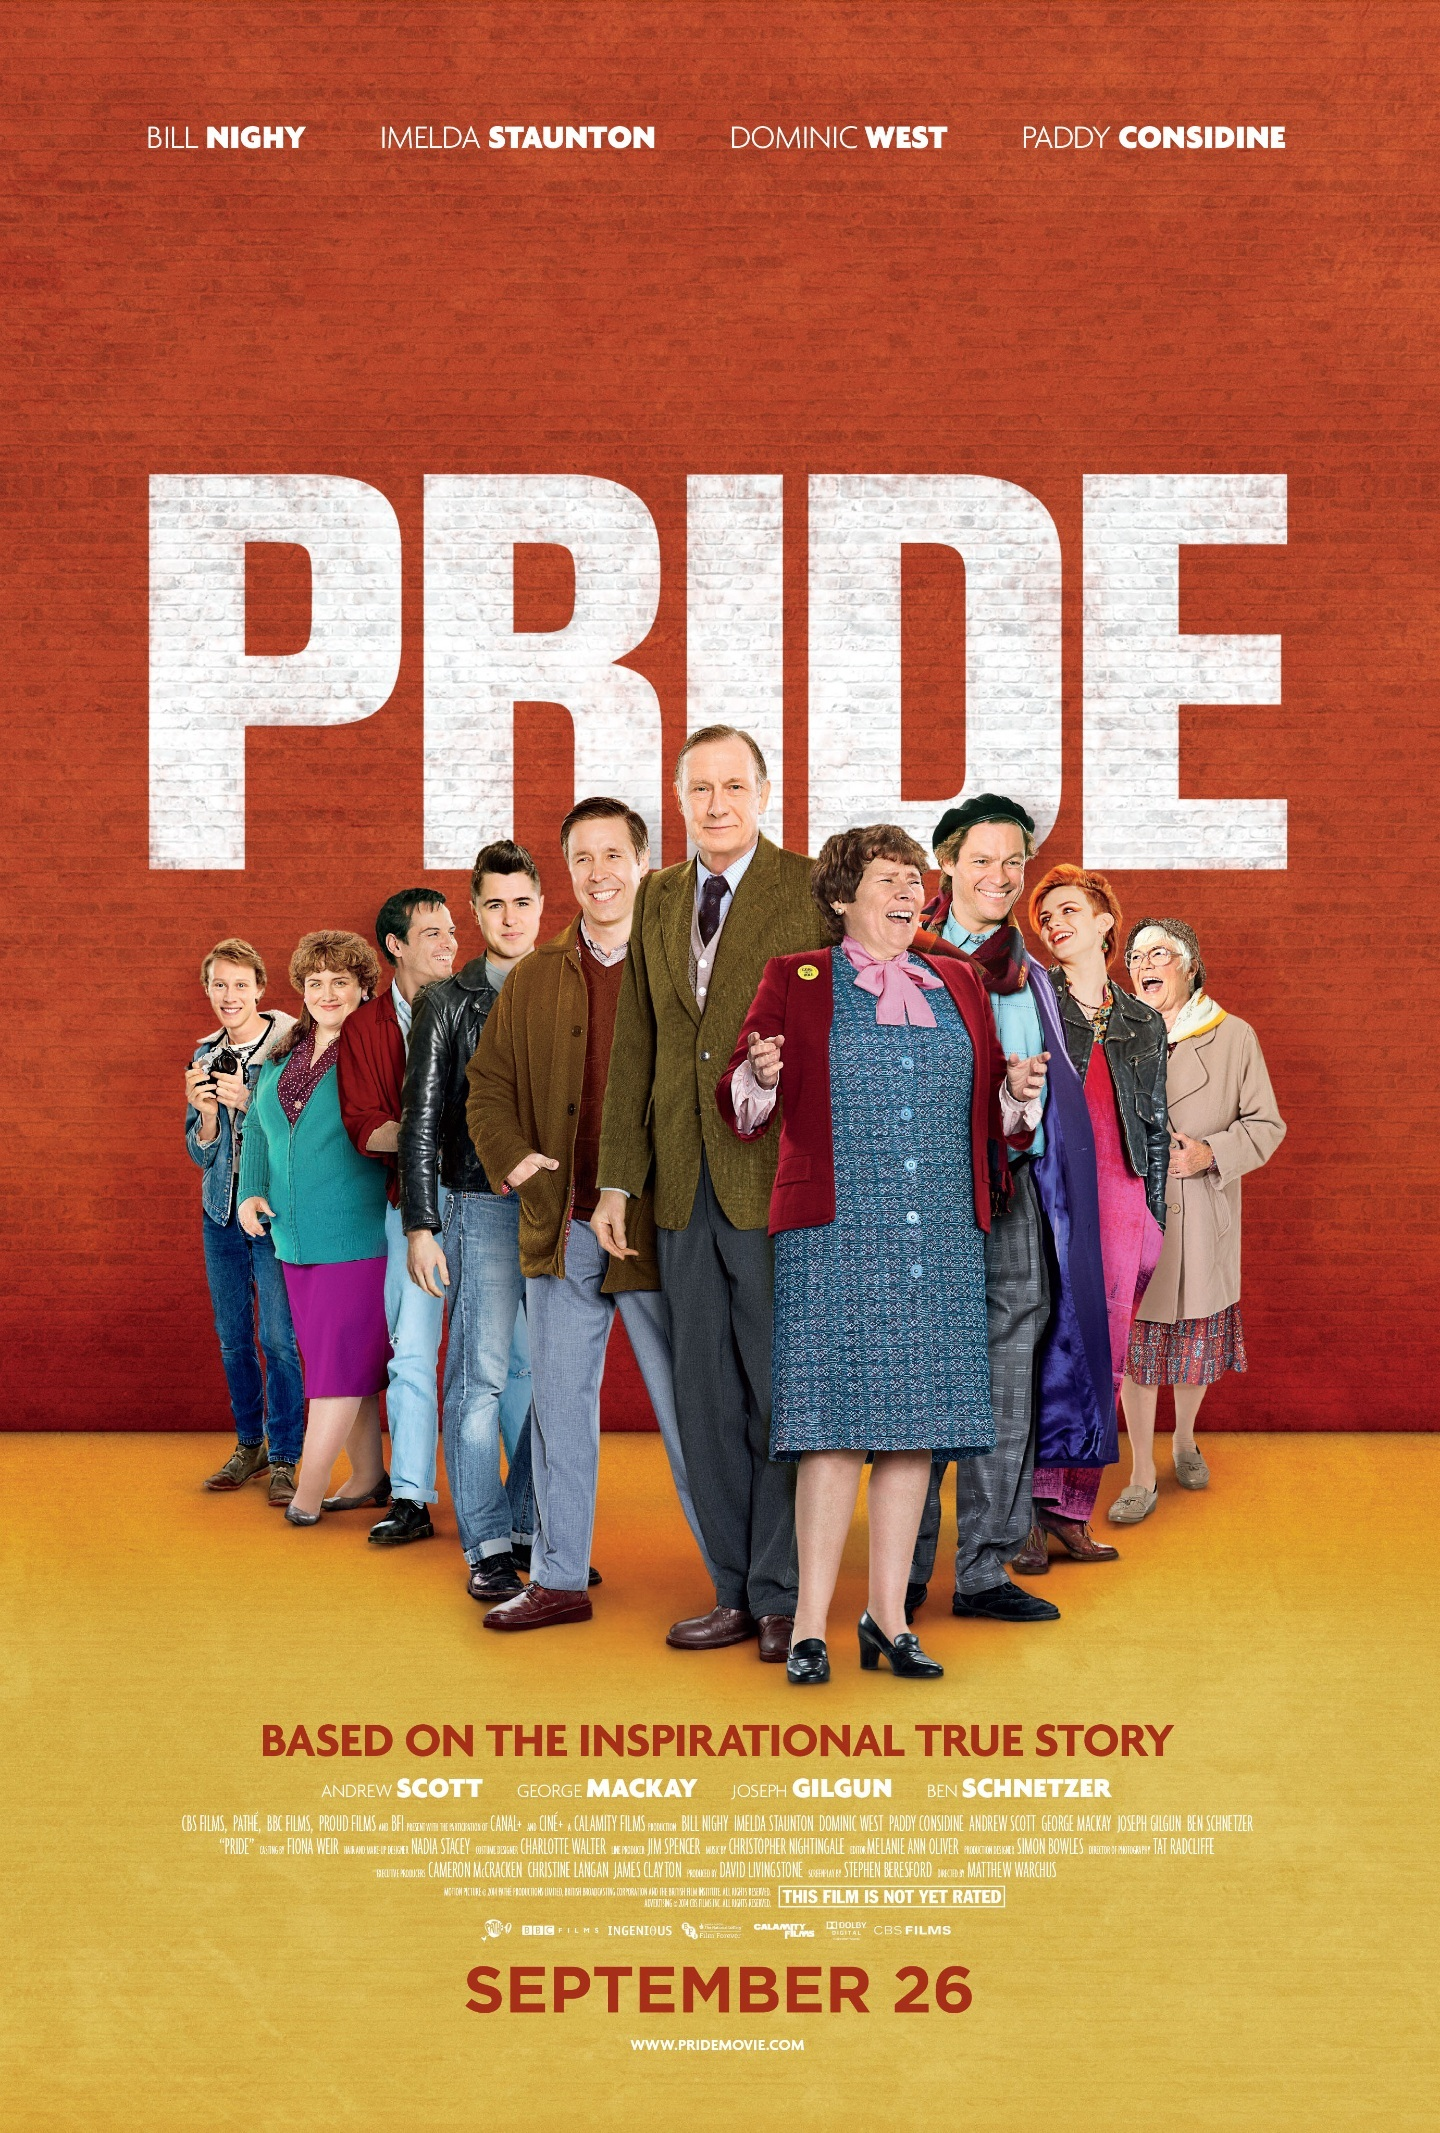 Promotional Movie Poster for the 2014 Movie Pride - Shows many of the characters from the film standing against a red background with the word PRIDE behind them.